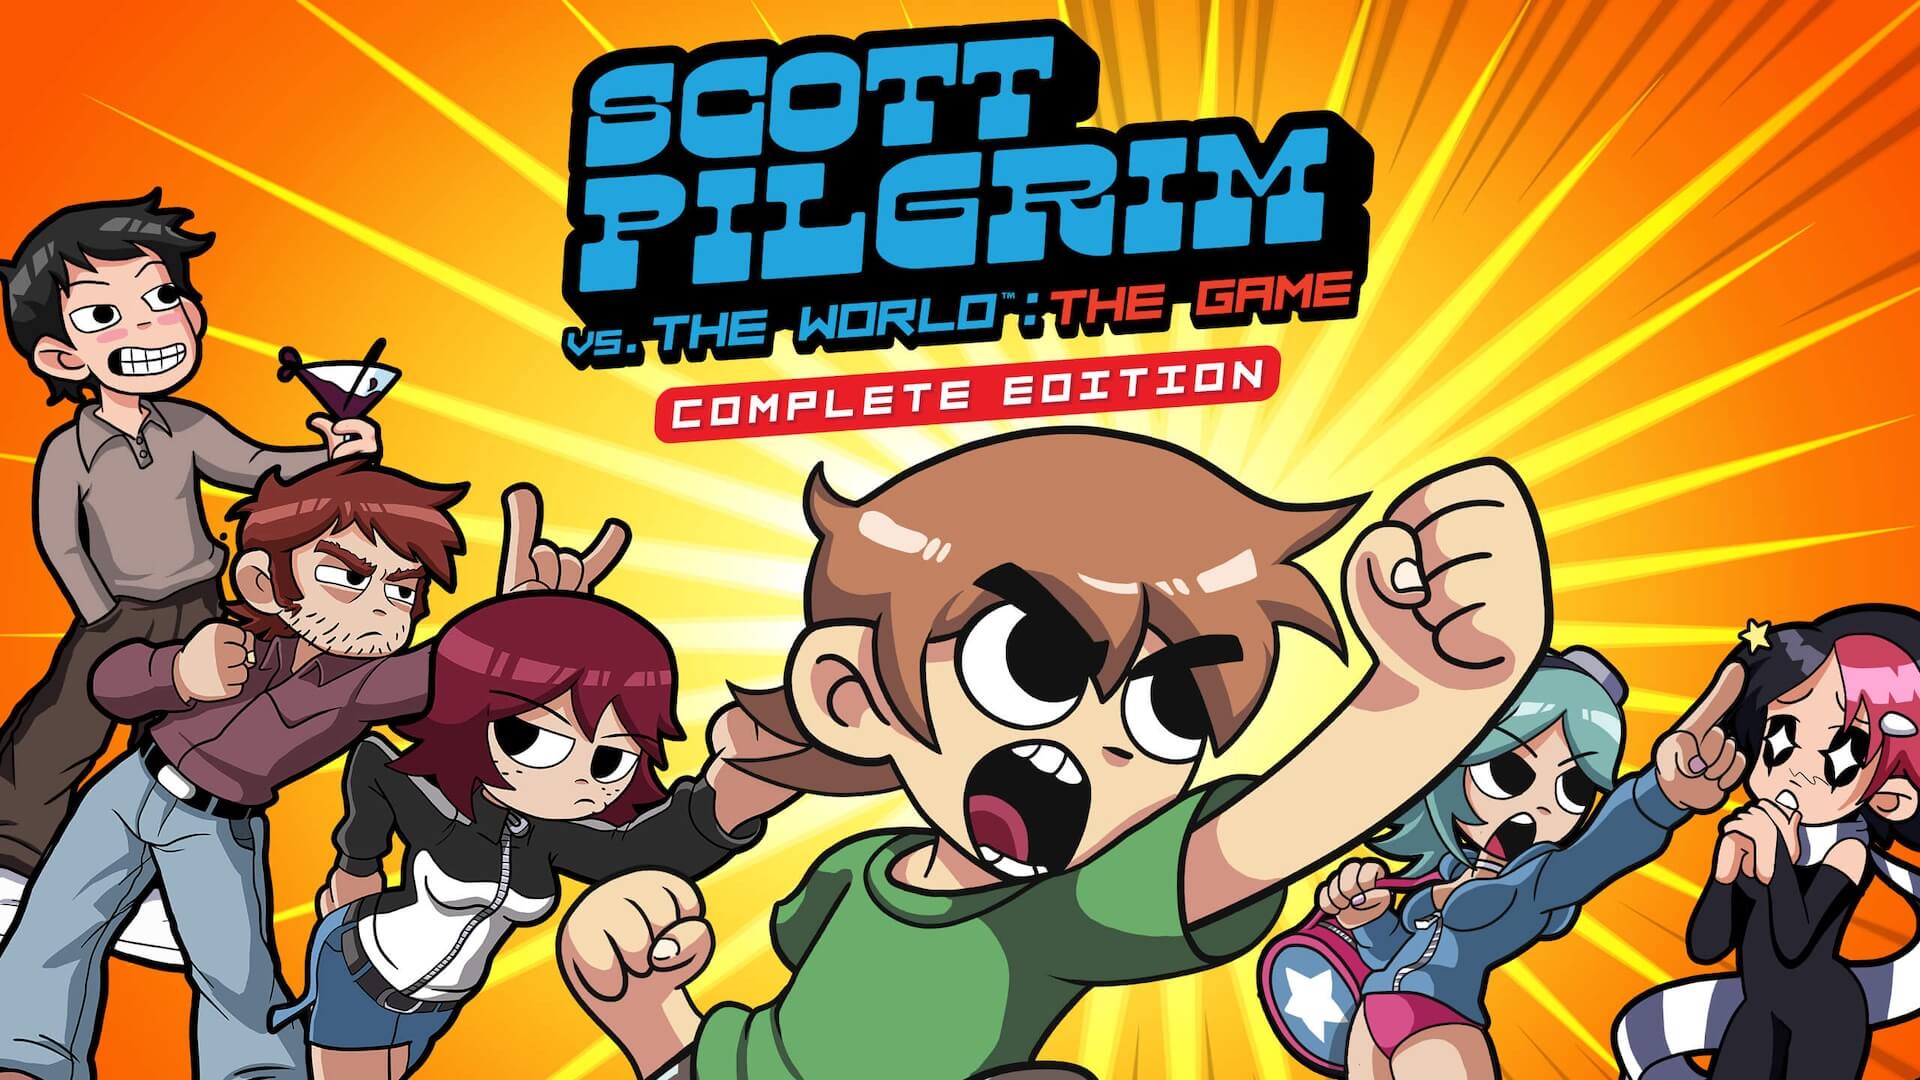 [Review] Scott Pilgrim vs. The World: The Game – Complete Edition